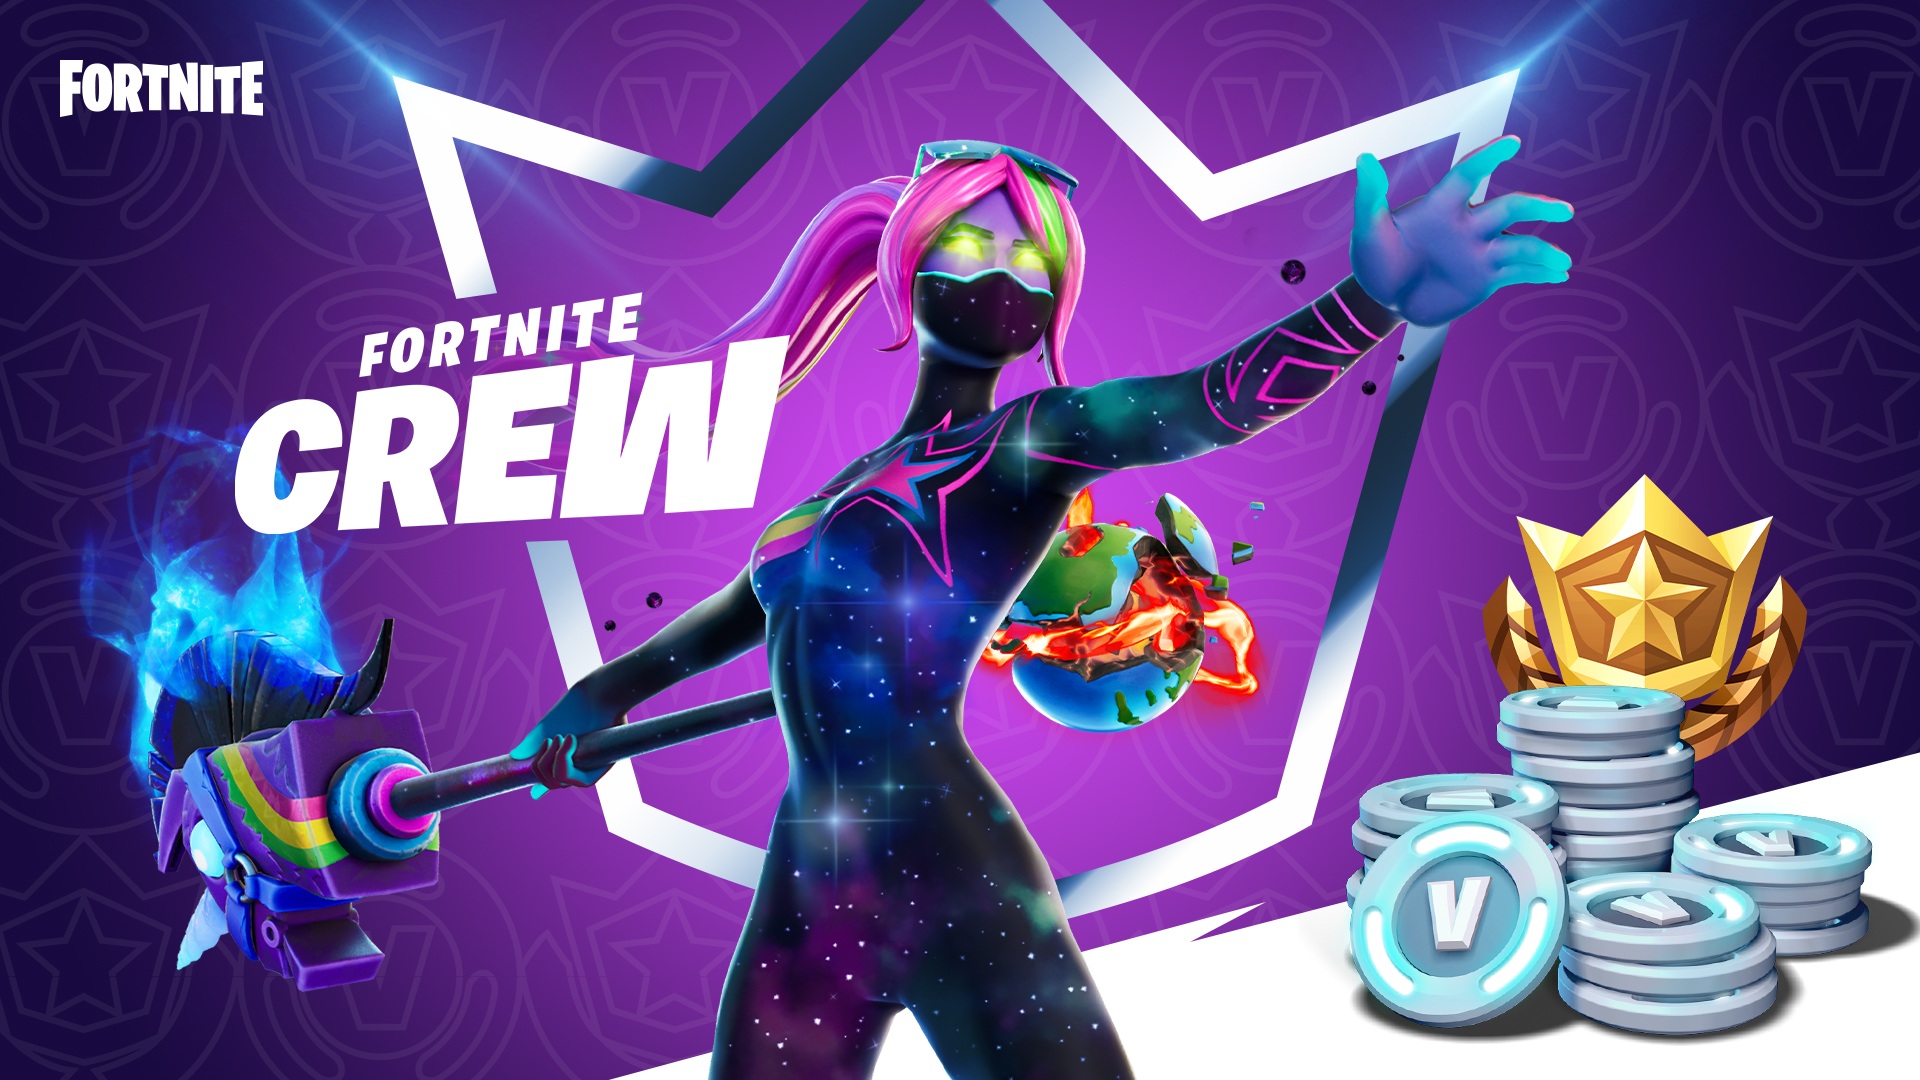 Epic reveals Fortnite Crew subscription service for exclusive skins